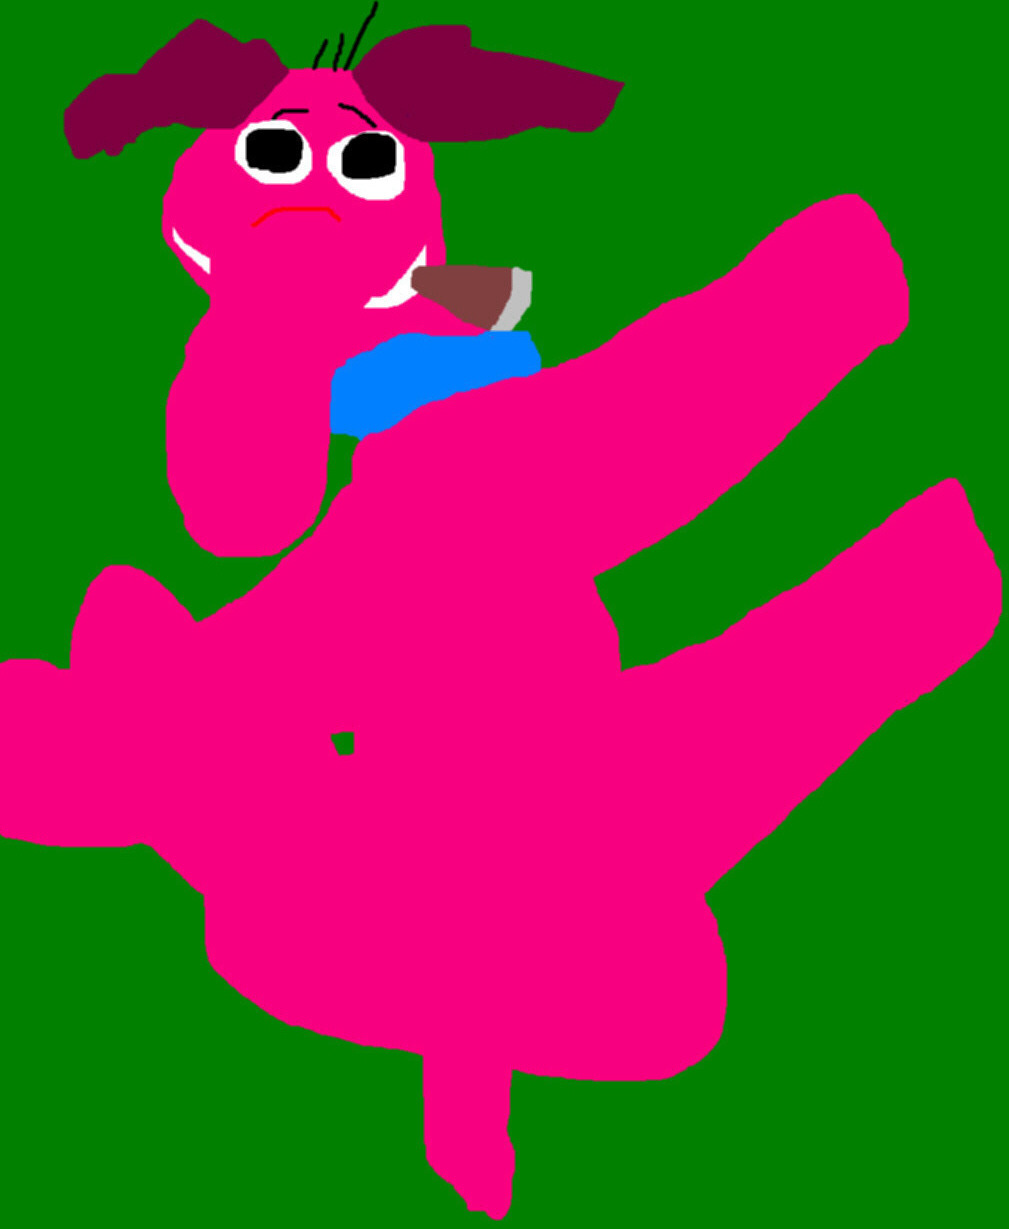 Cyril Sneer In A Funny Pose Ms Paint^^ by Falconlobo